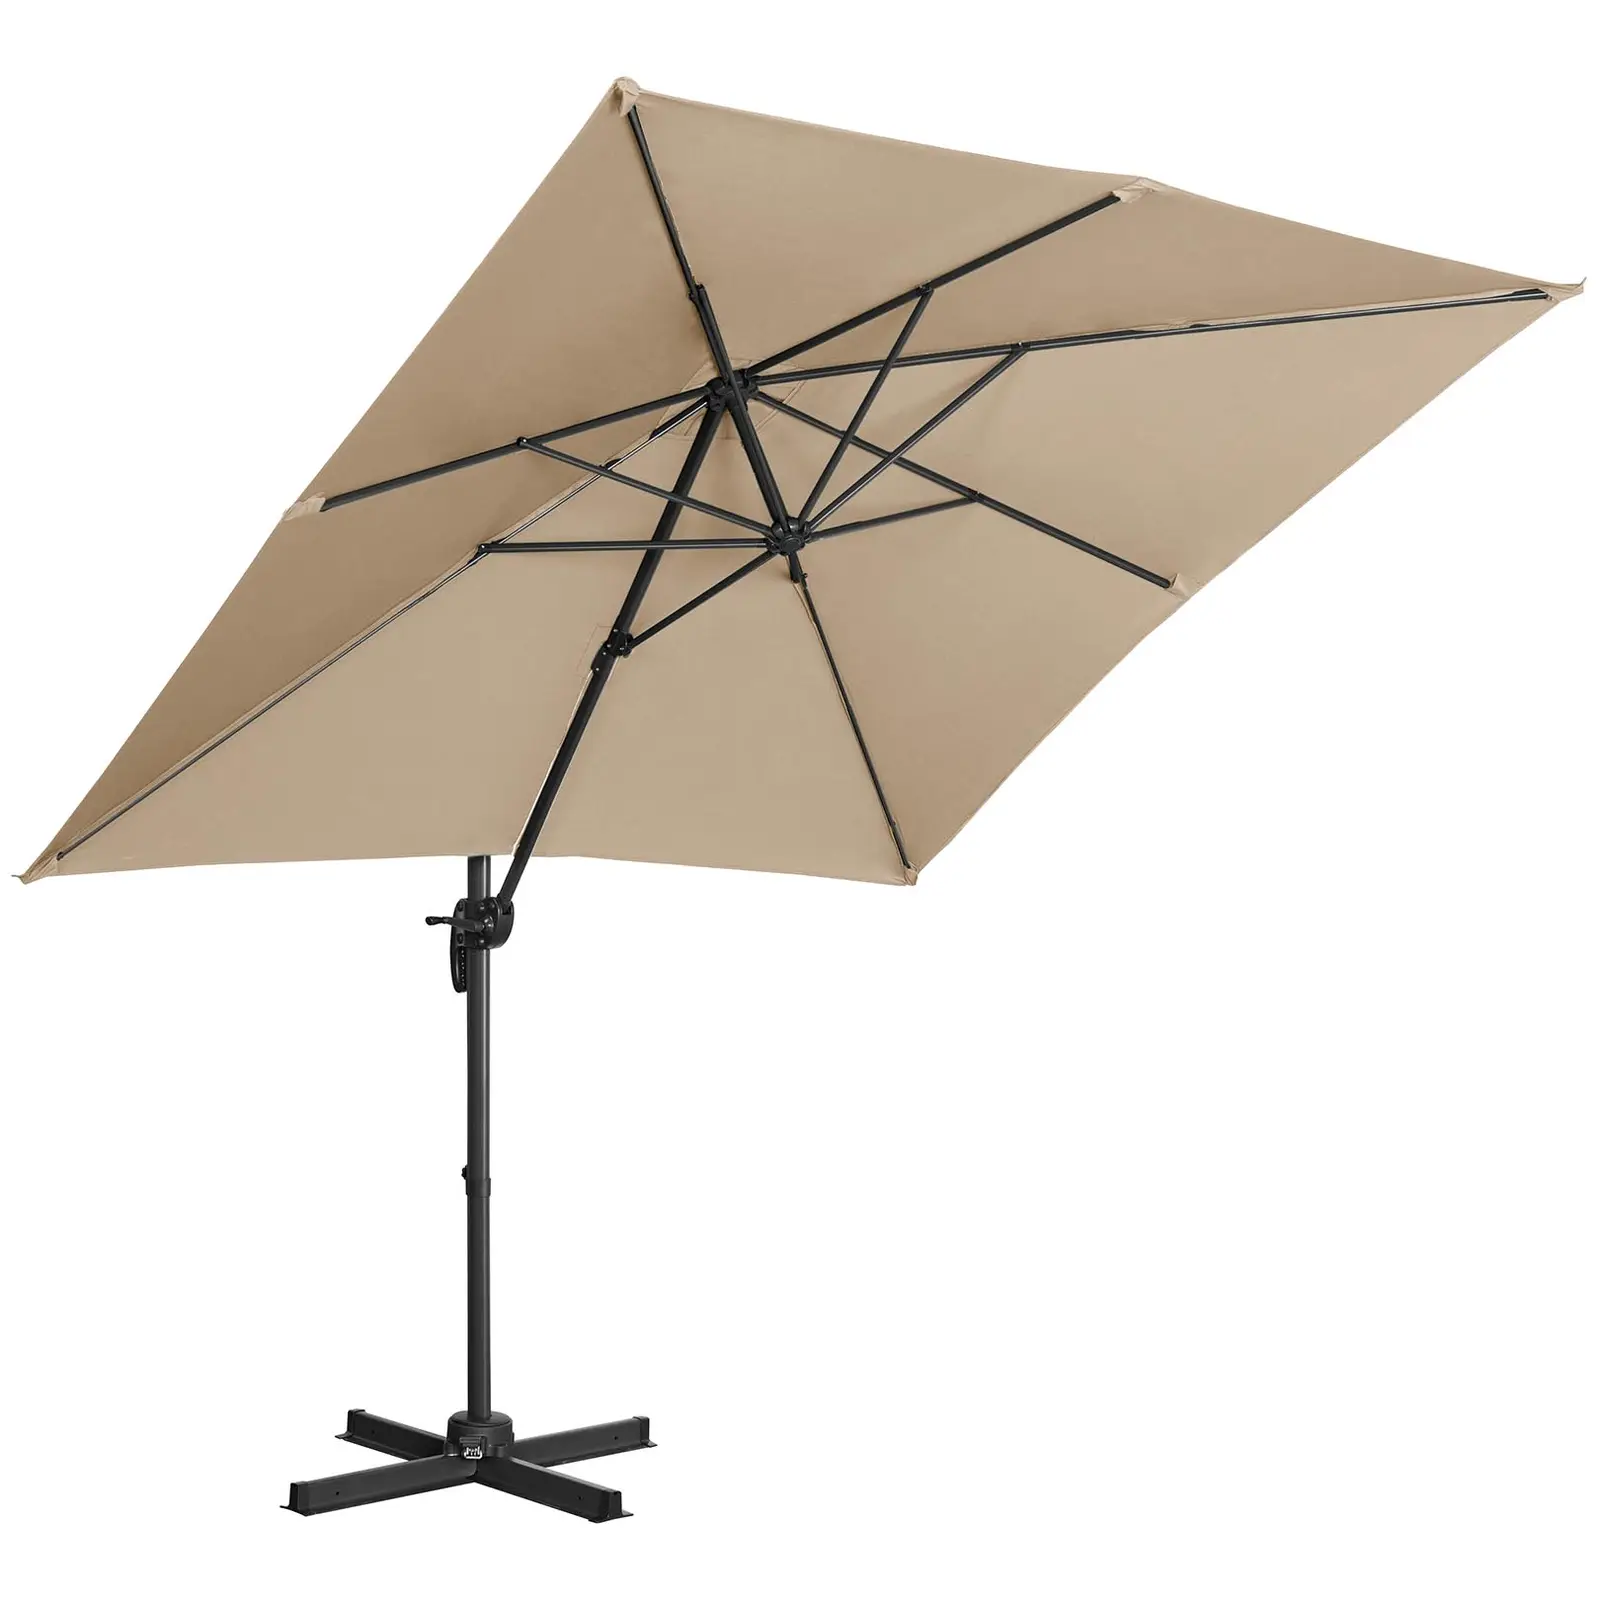 Factory second Garden umbrella - taupe - square - 250 x 250 cm - tiltable and rotatable